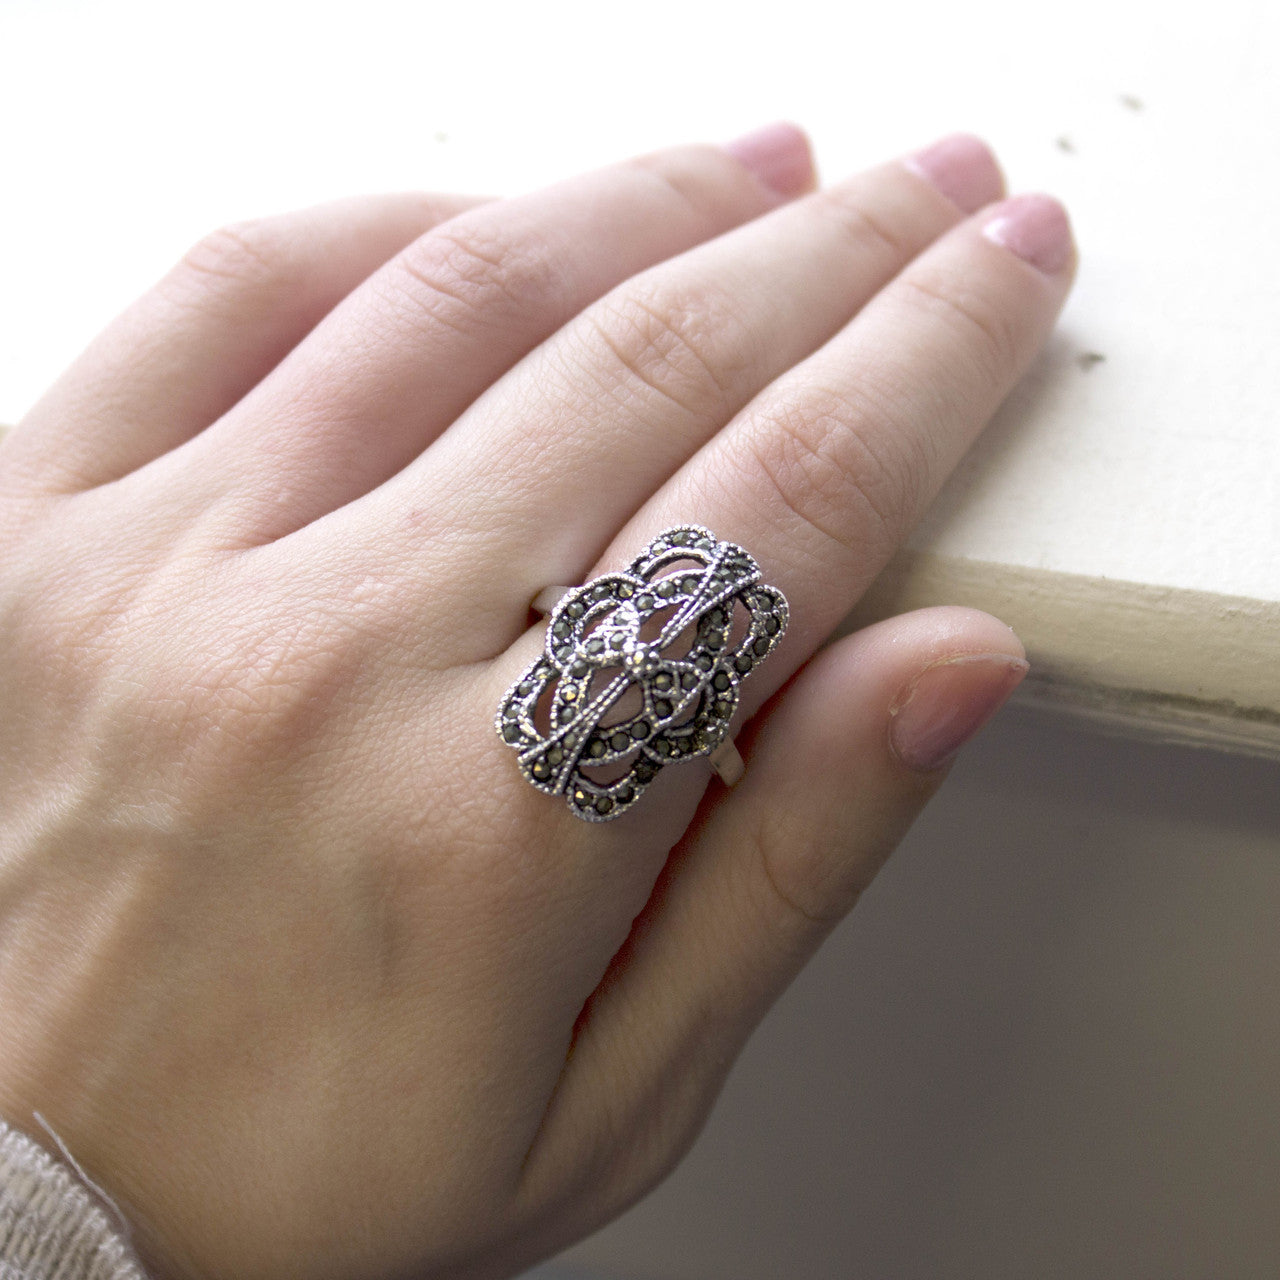 Vintage Genuine Marcasite Cocktail Ring - Antique 18k White Gold Electroplated - Made in USA